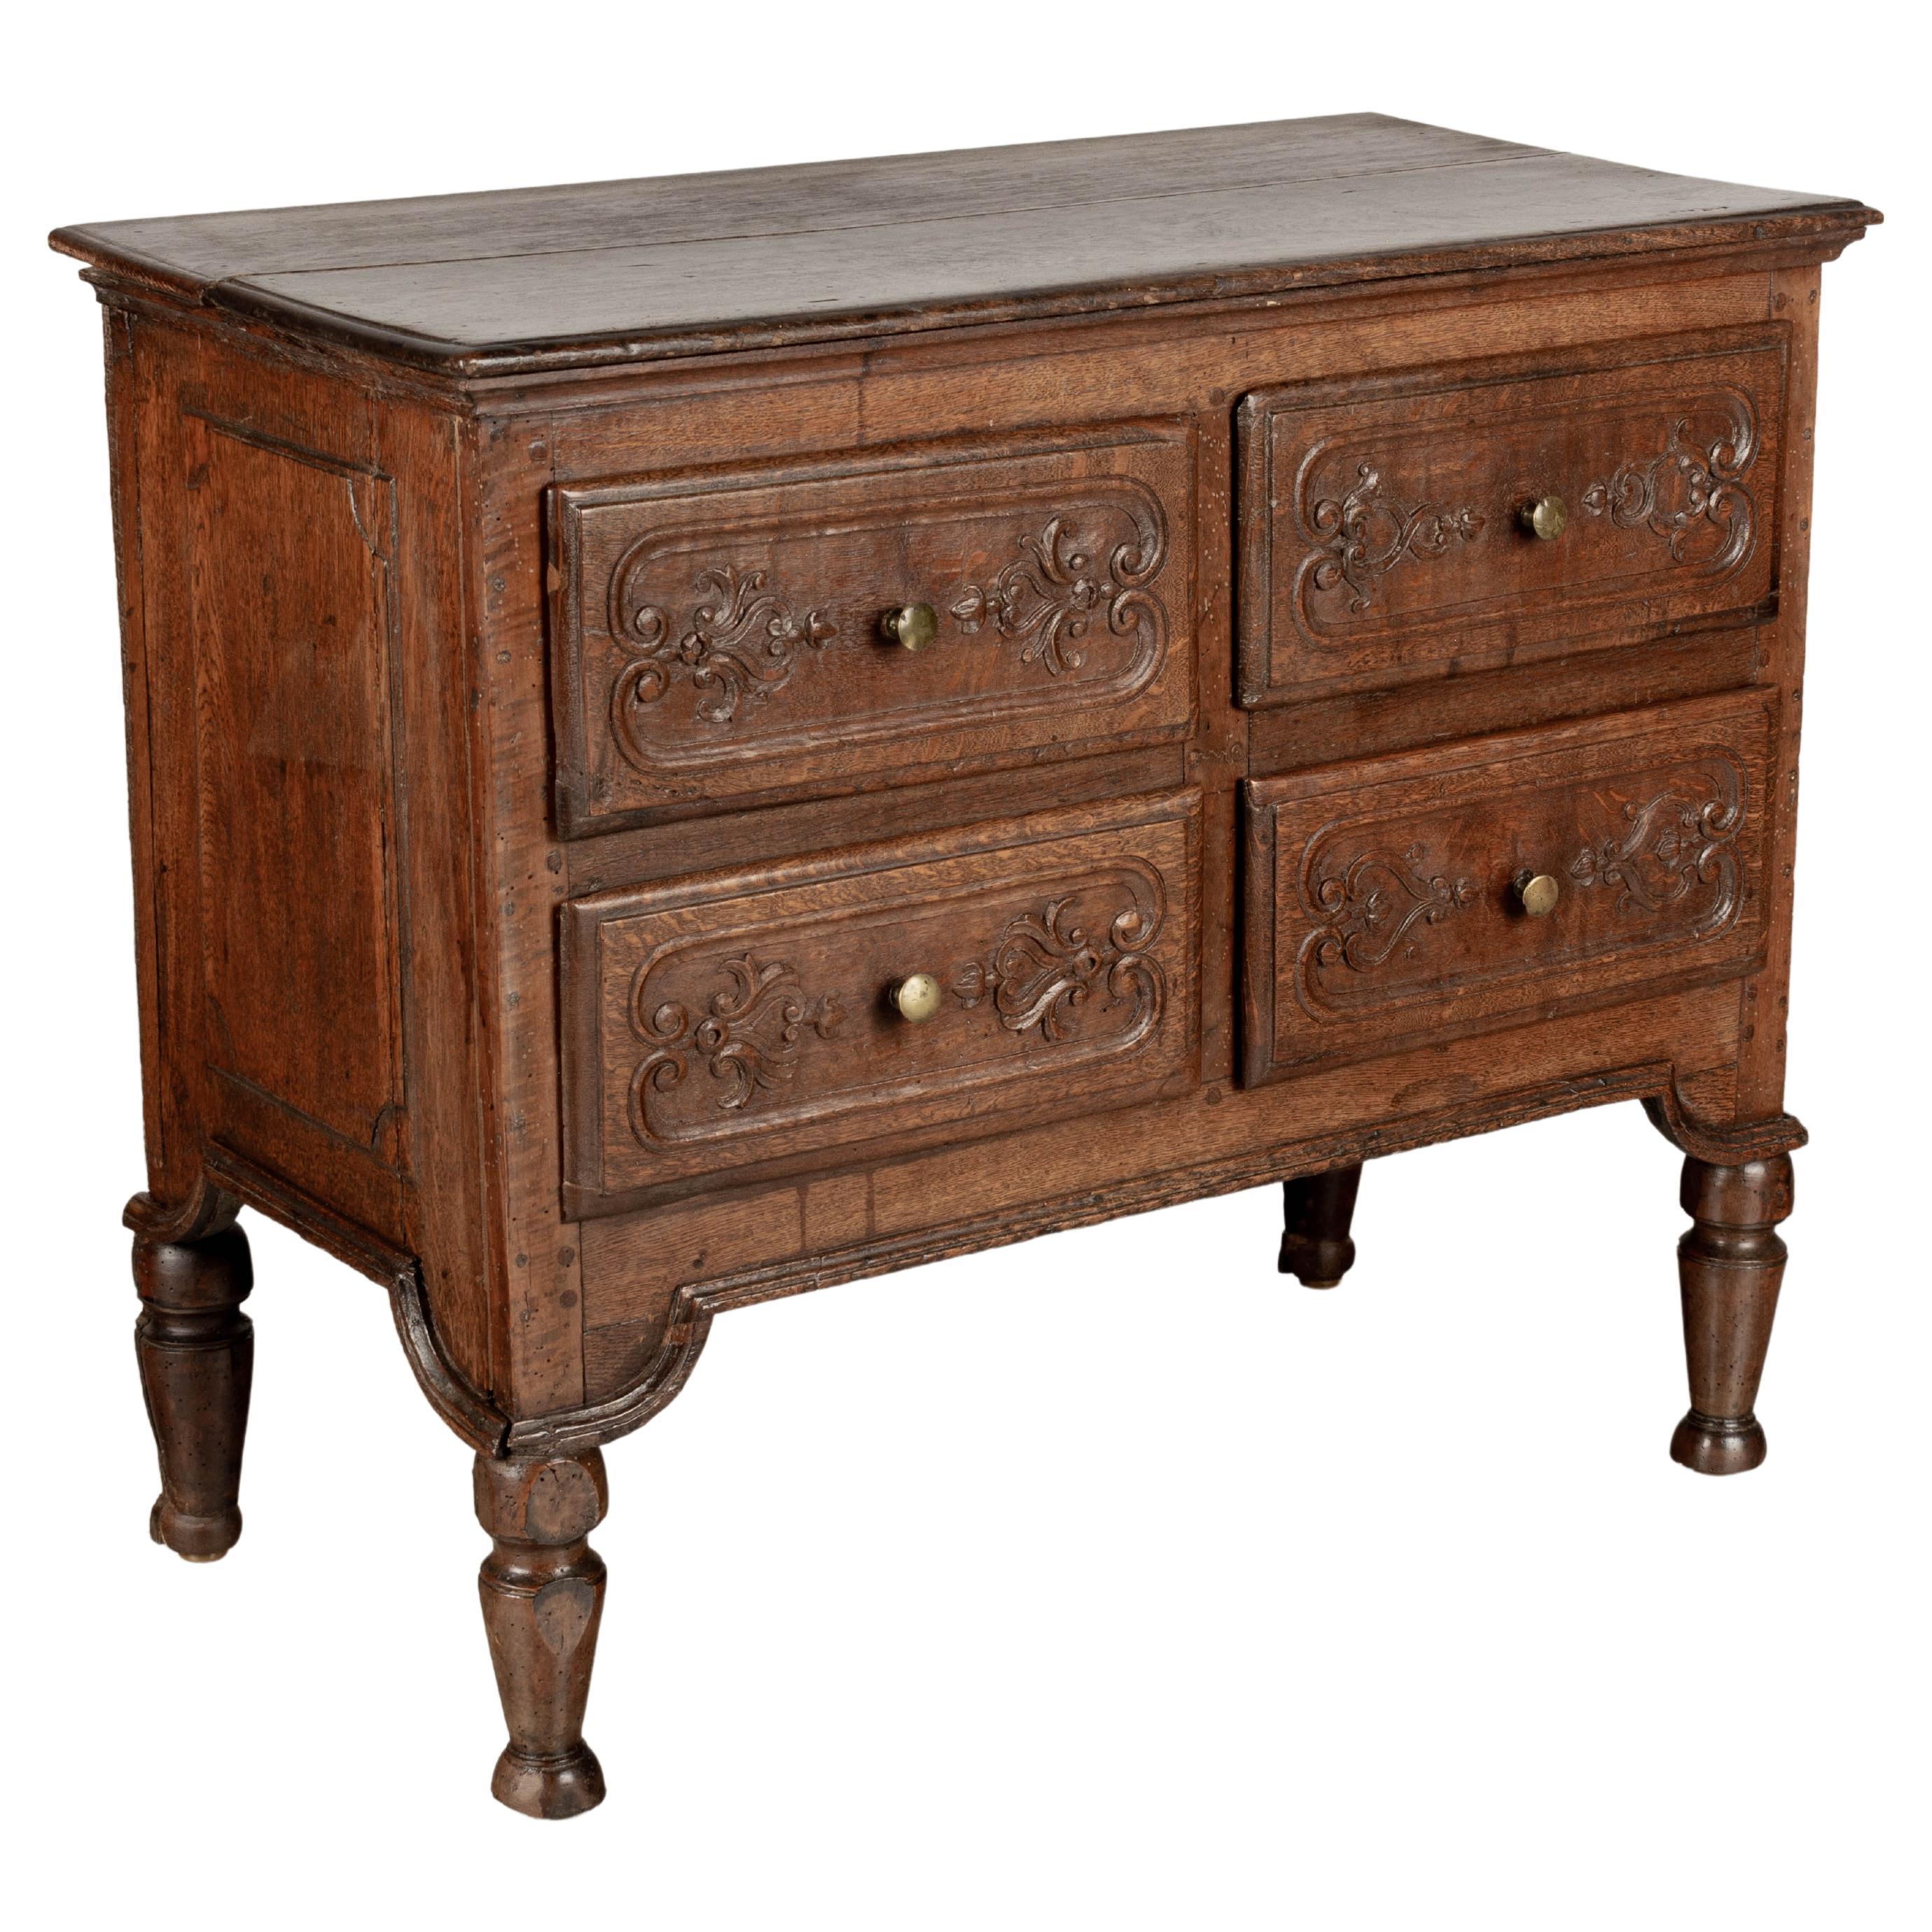 19th Century Louis XVI Style Petite Commode or Child' s Chest